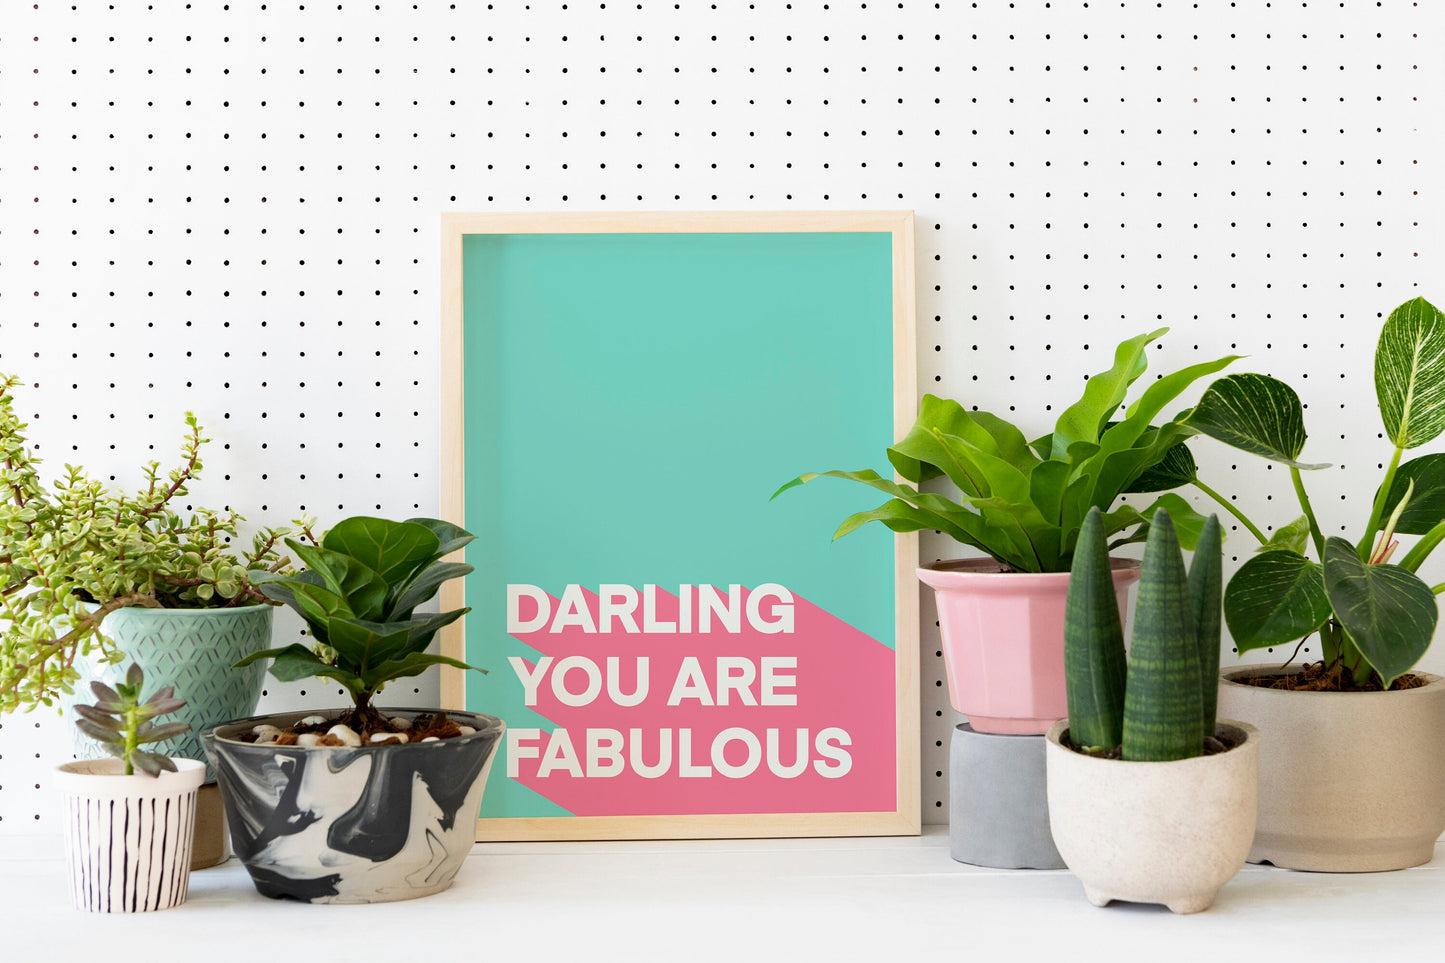 Darling You Are Fabulous Print in Bright Teal